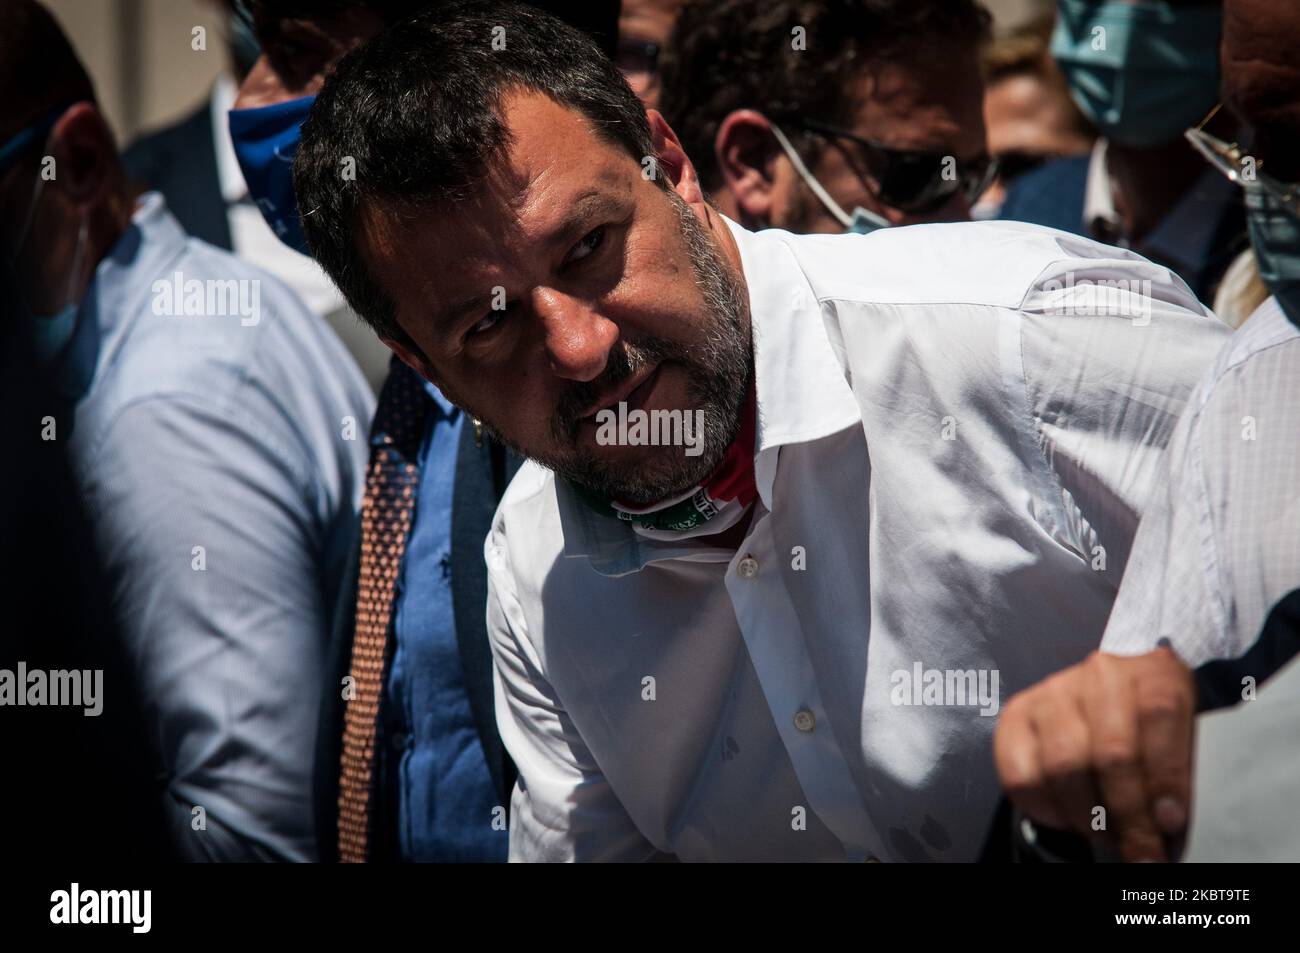 Lega Political party leader Matteo Salvini protest during a demonstration called 'Blocca Italia' (Block Italy) on July 9, 2020 in Rome, Italy. The leader of the Lega is protesting against the Italian government who he thinks is blocking the Italian economy and to request the release of the situation of Autostrade S.p.A. (Photo by Andrea Ronchini/NurPhoto) Stock Photo